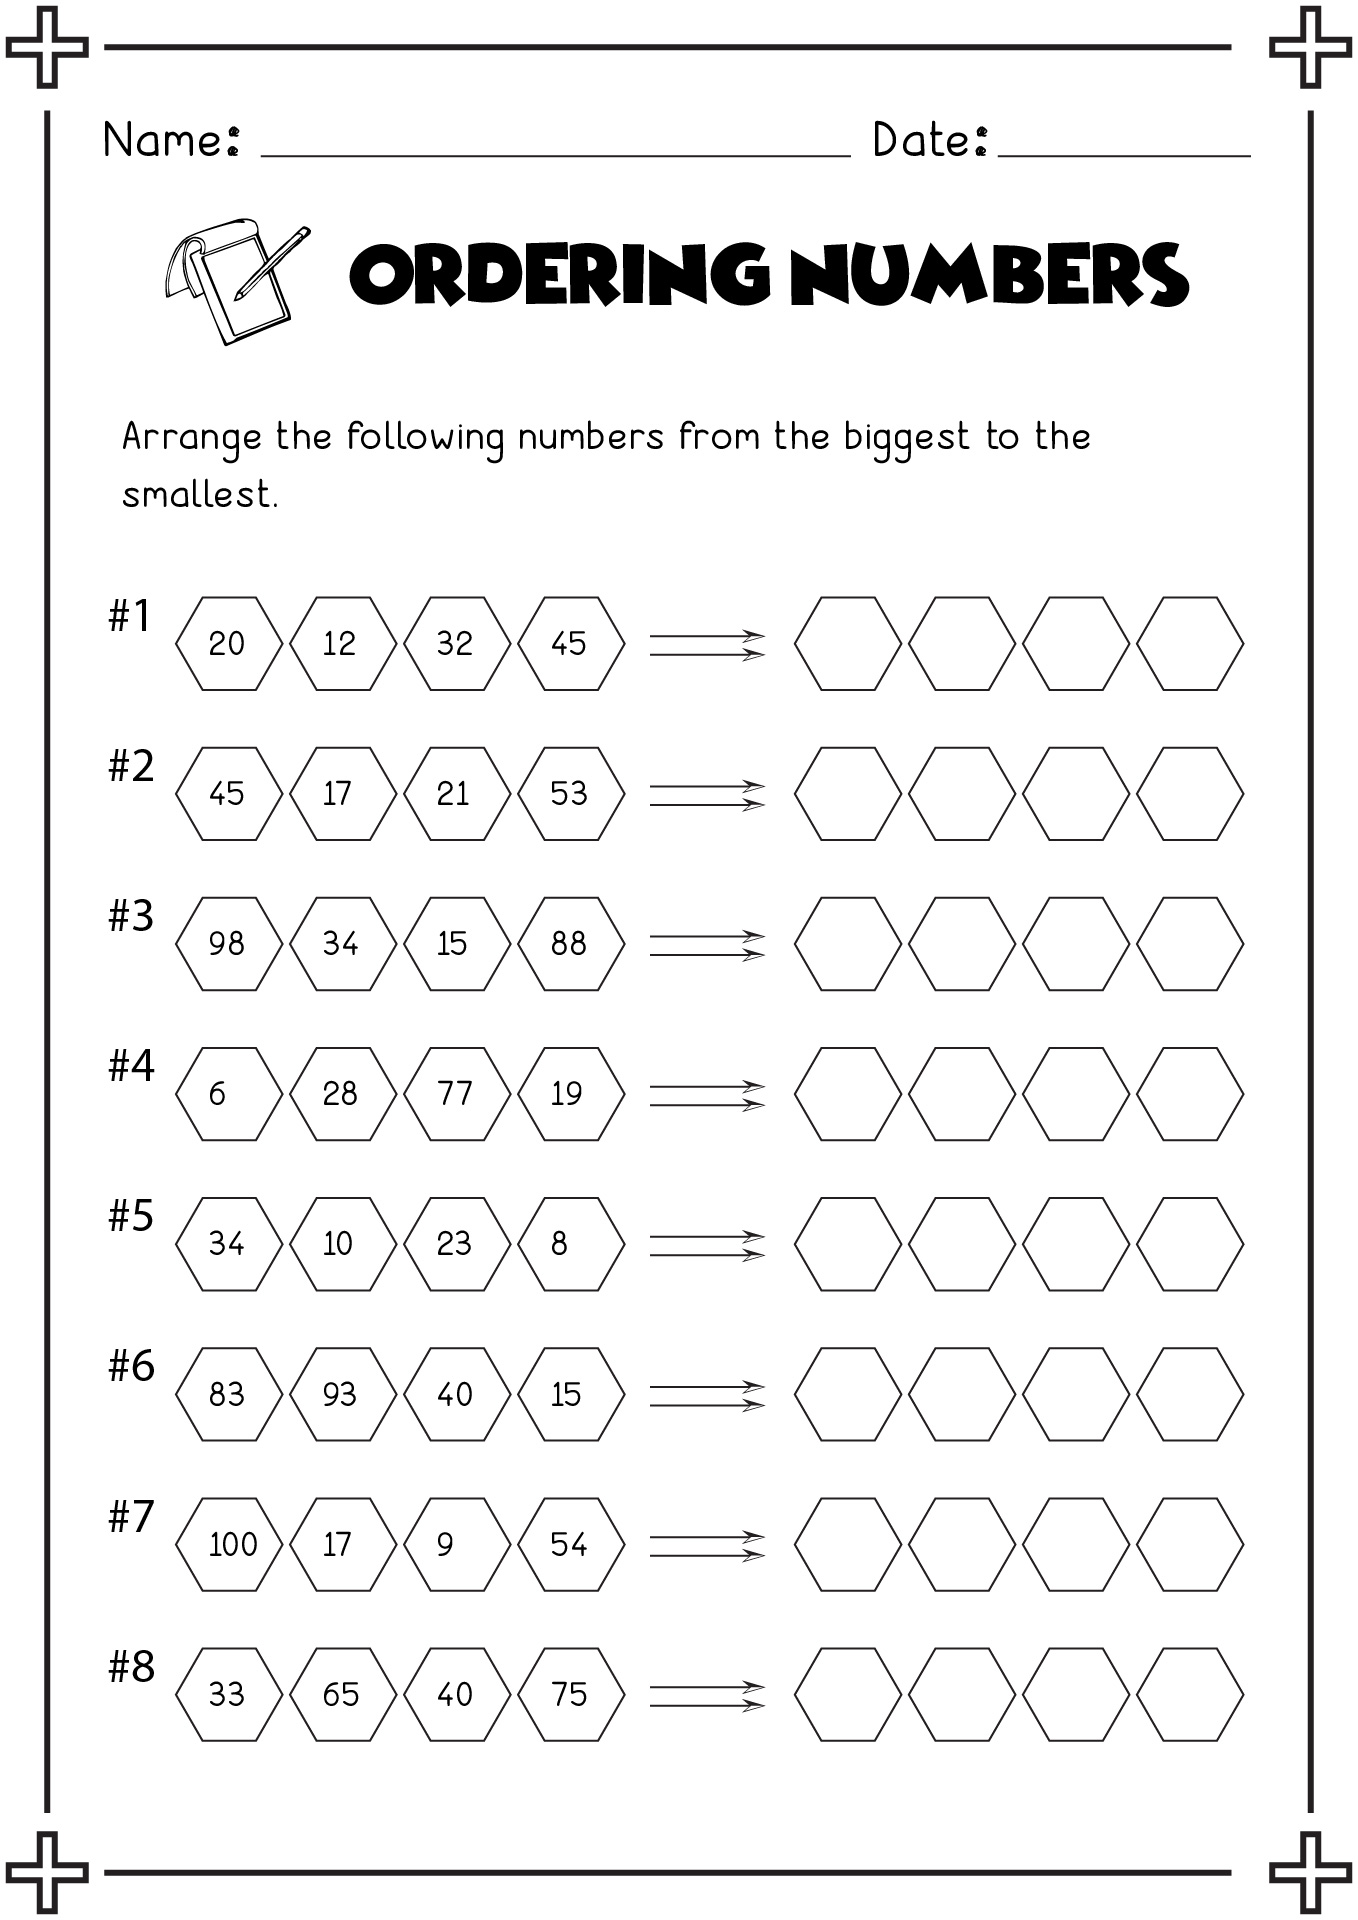 12-best-images-of-counting-numbers-to-1000-worksheets-skip-counting-by-10-to-1000-ordering